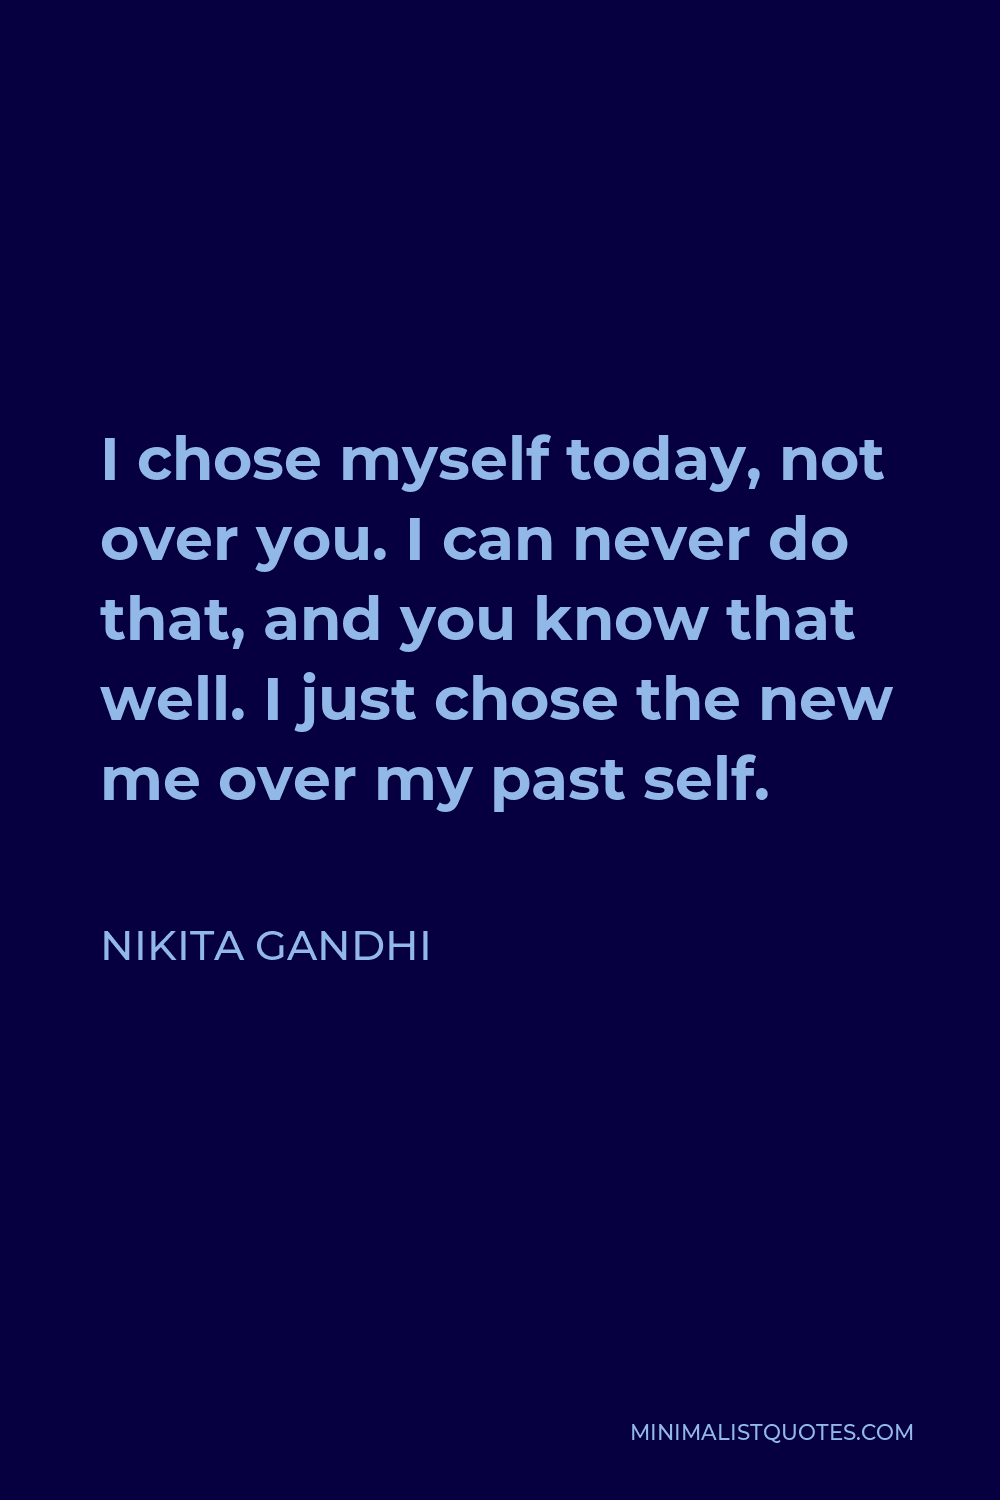 Nikita Gandhi Quote - I chose myself today, not over you. I can never do that, and you know that well. I just chose the new me over my past self.